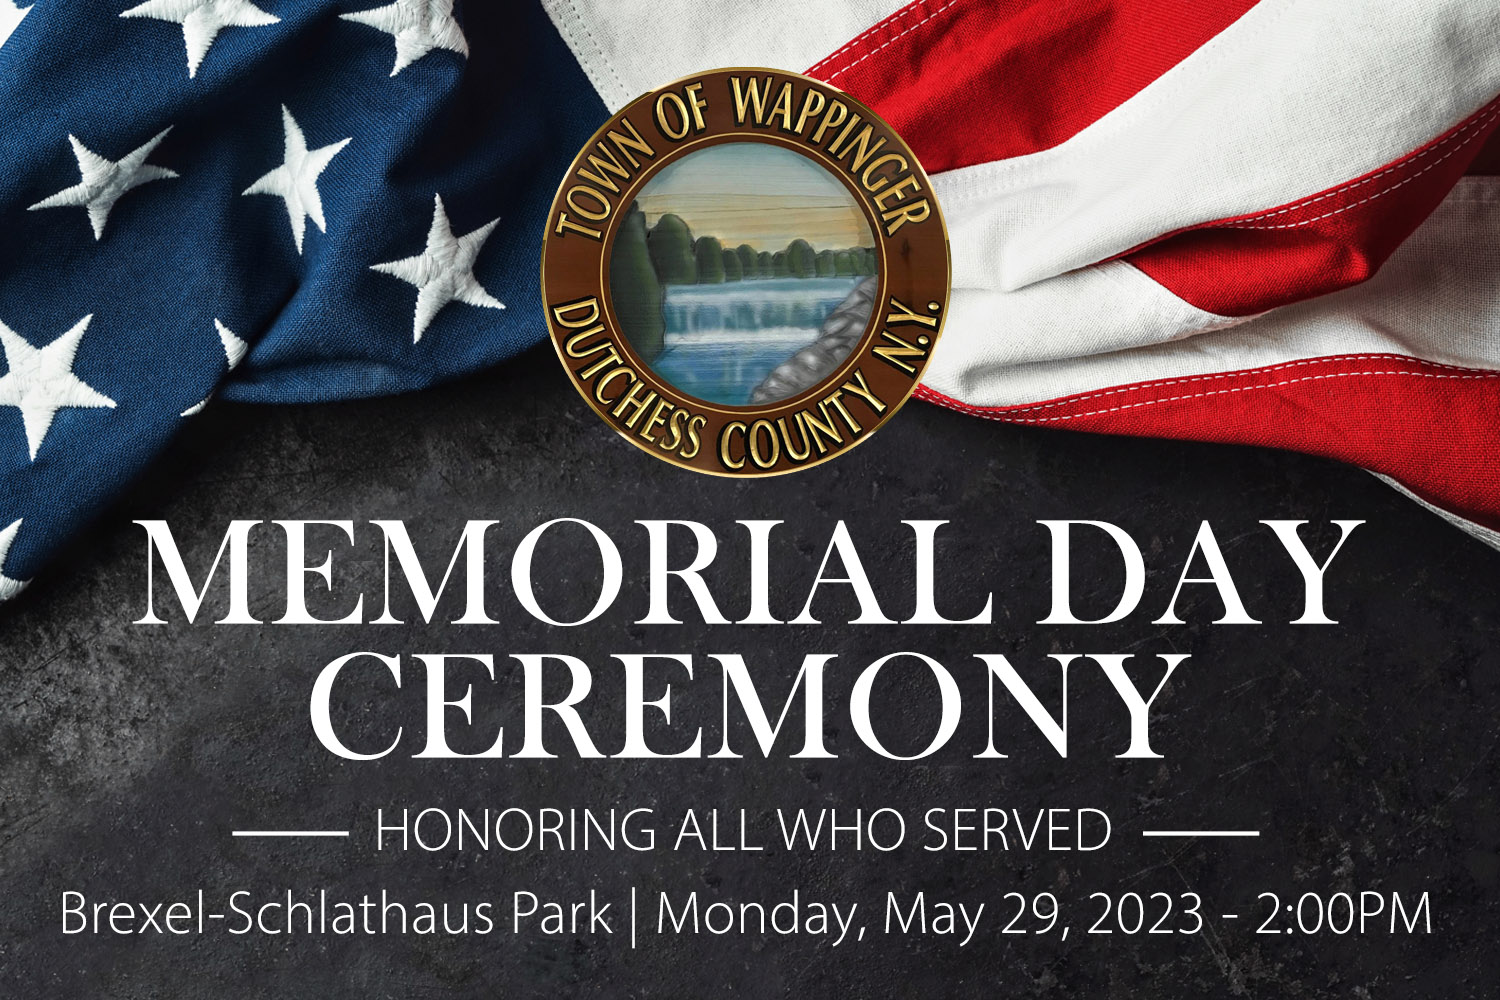 https://townofwappingerny.gov/wp-content/uploads/2023/05/Memorial-Day-1500x1000-2023-a.jpg